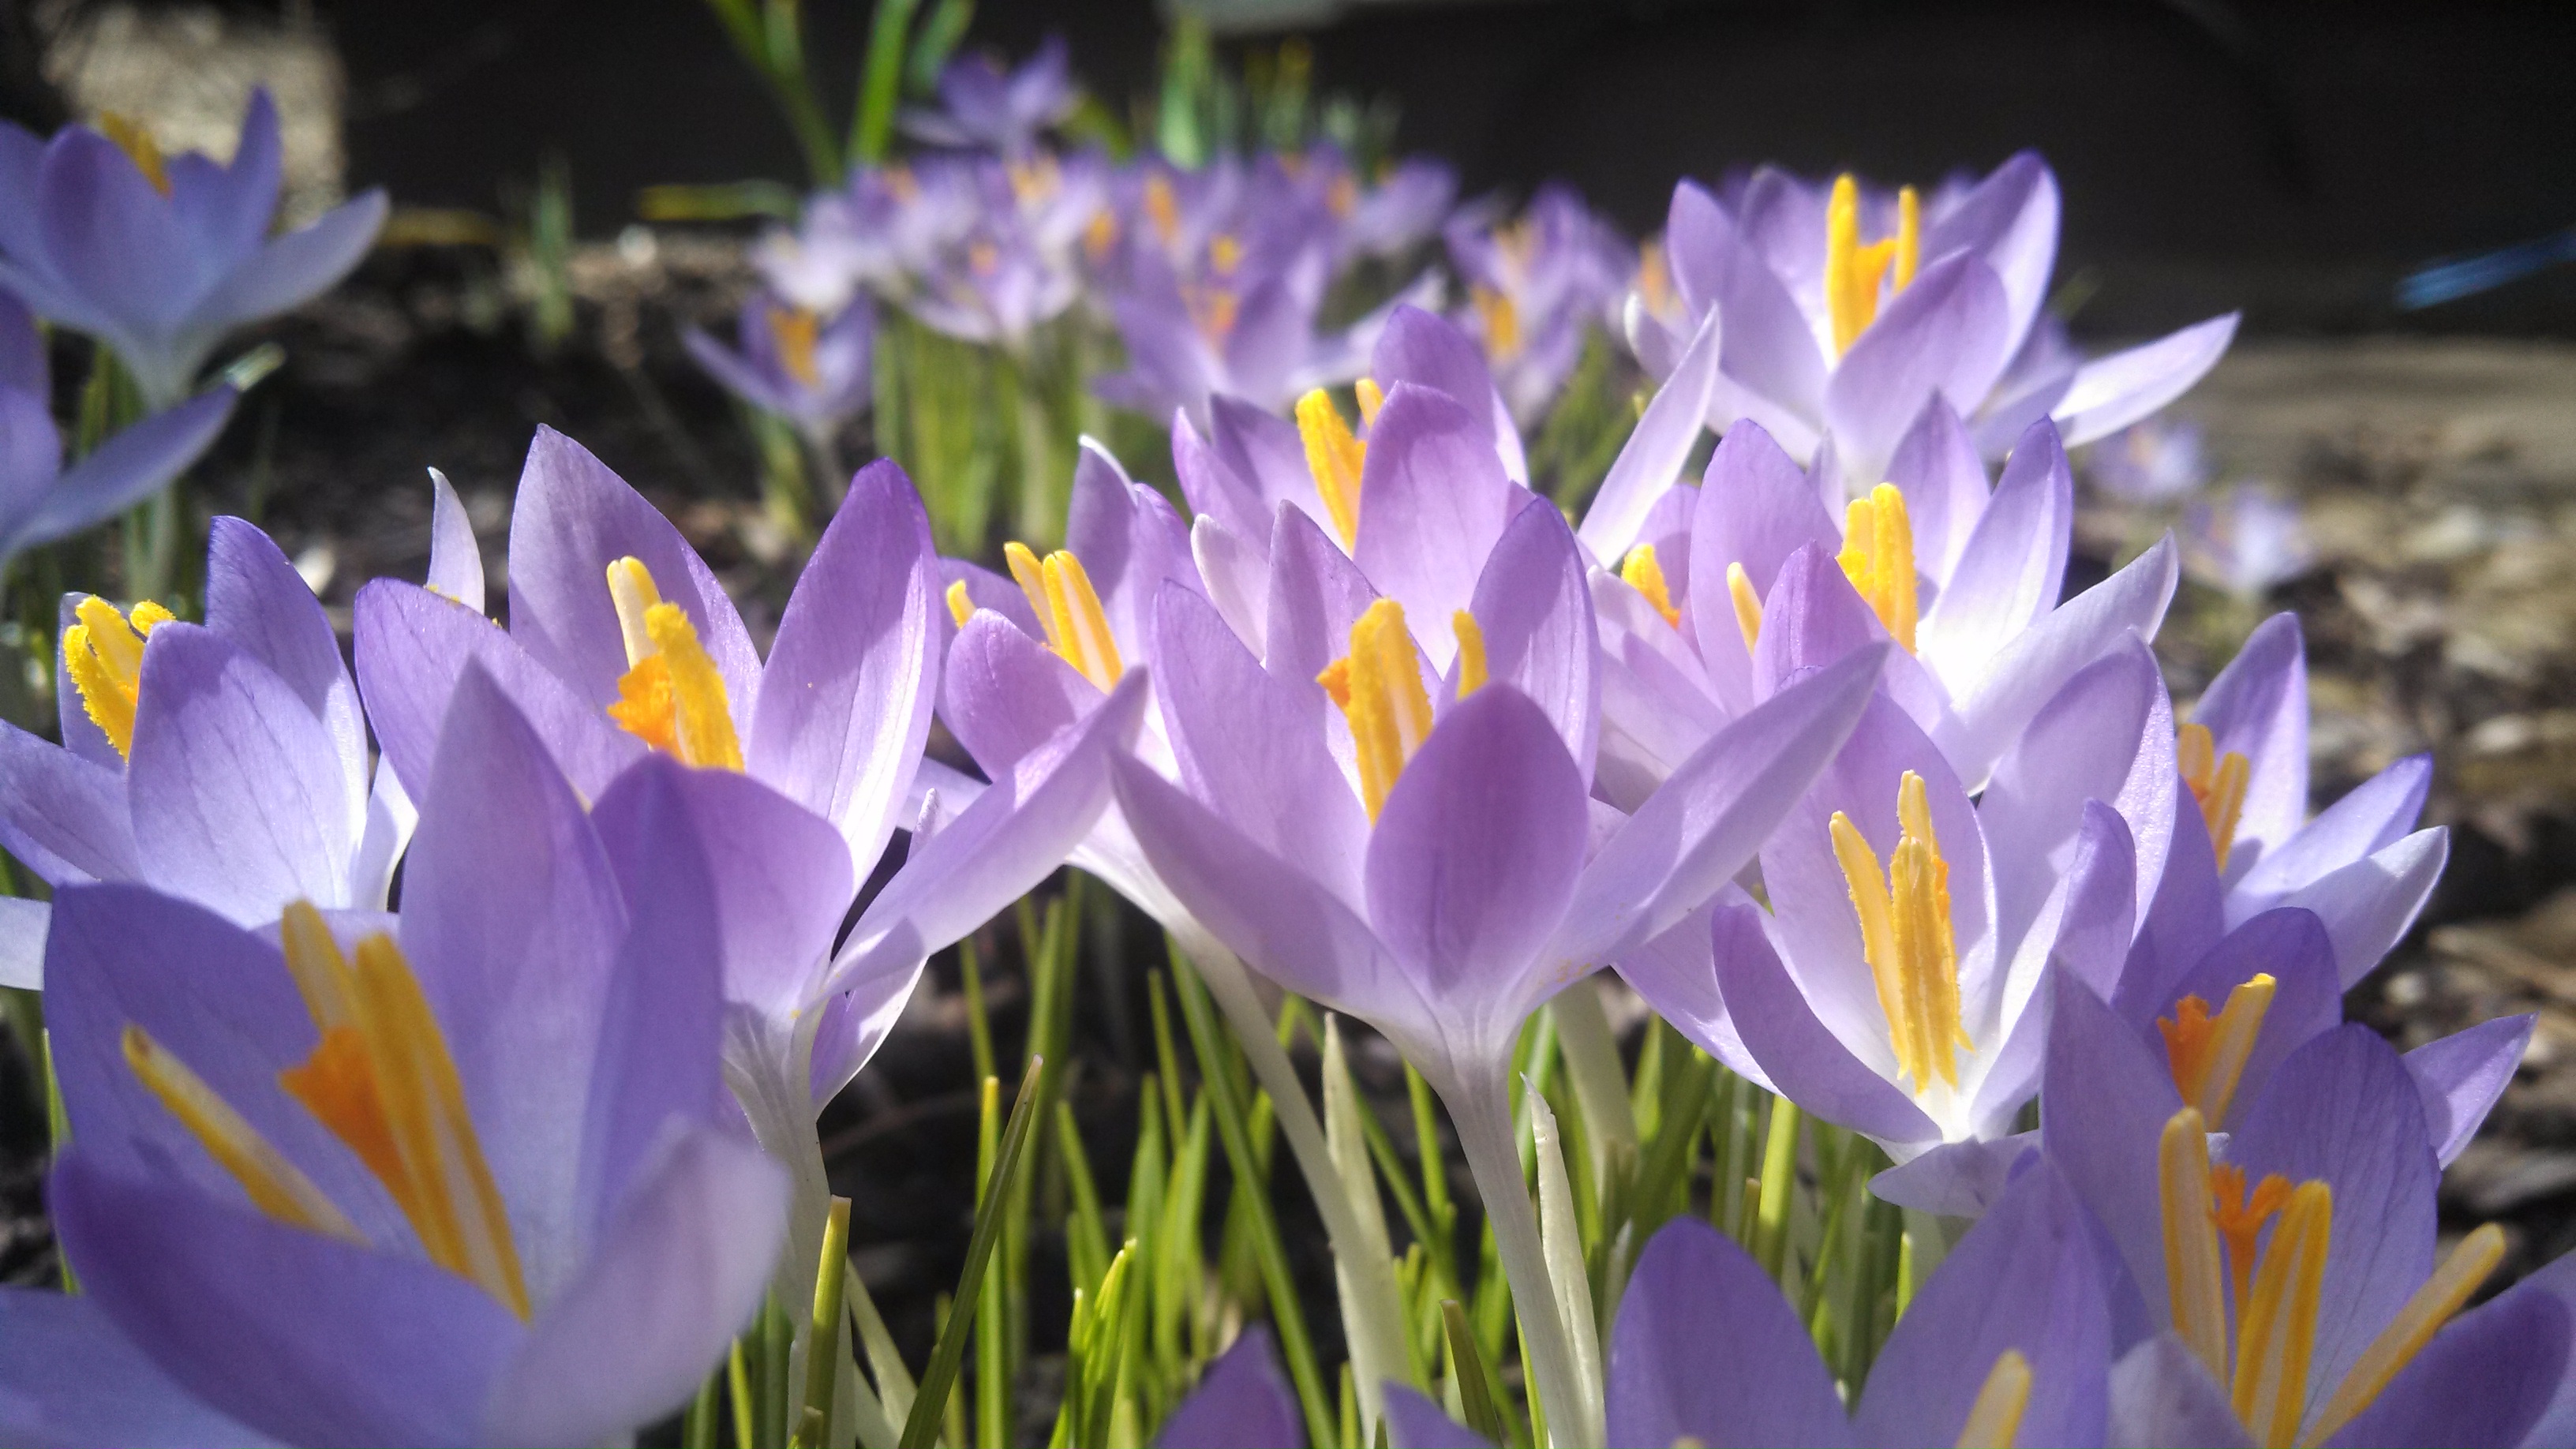 Spring Crocuses in sunlight, Amish Country hotel garden